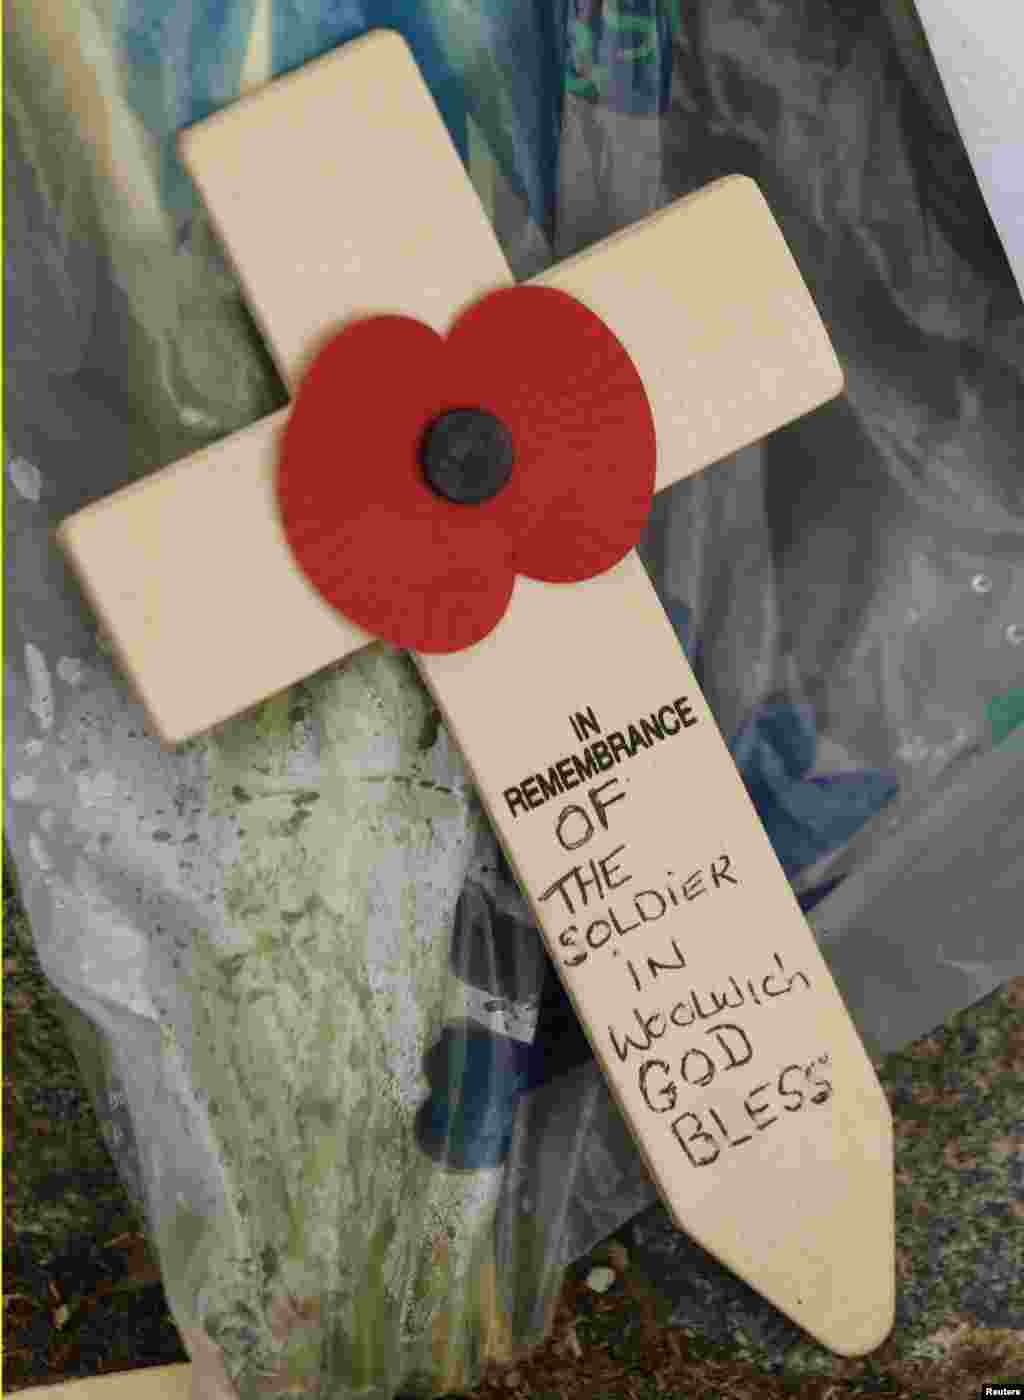 A wooden cross and a poppy, left as a tribute, are seen near the scene of the killing of a British soldier in Woolwich, London, May 23, 2013.